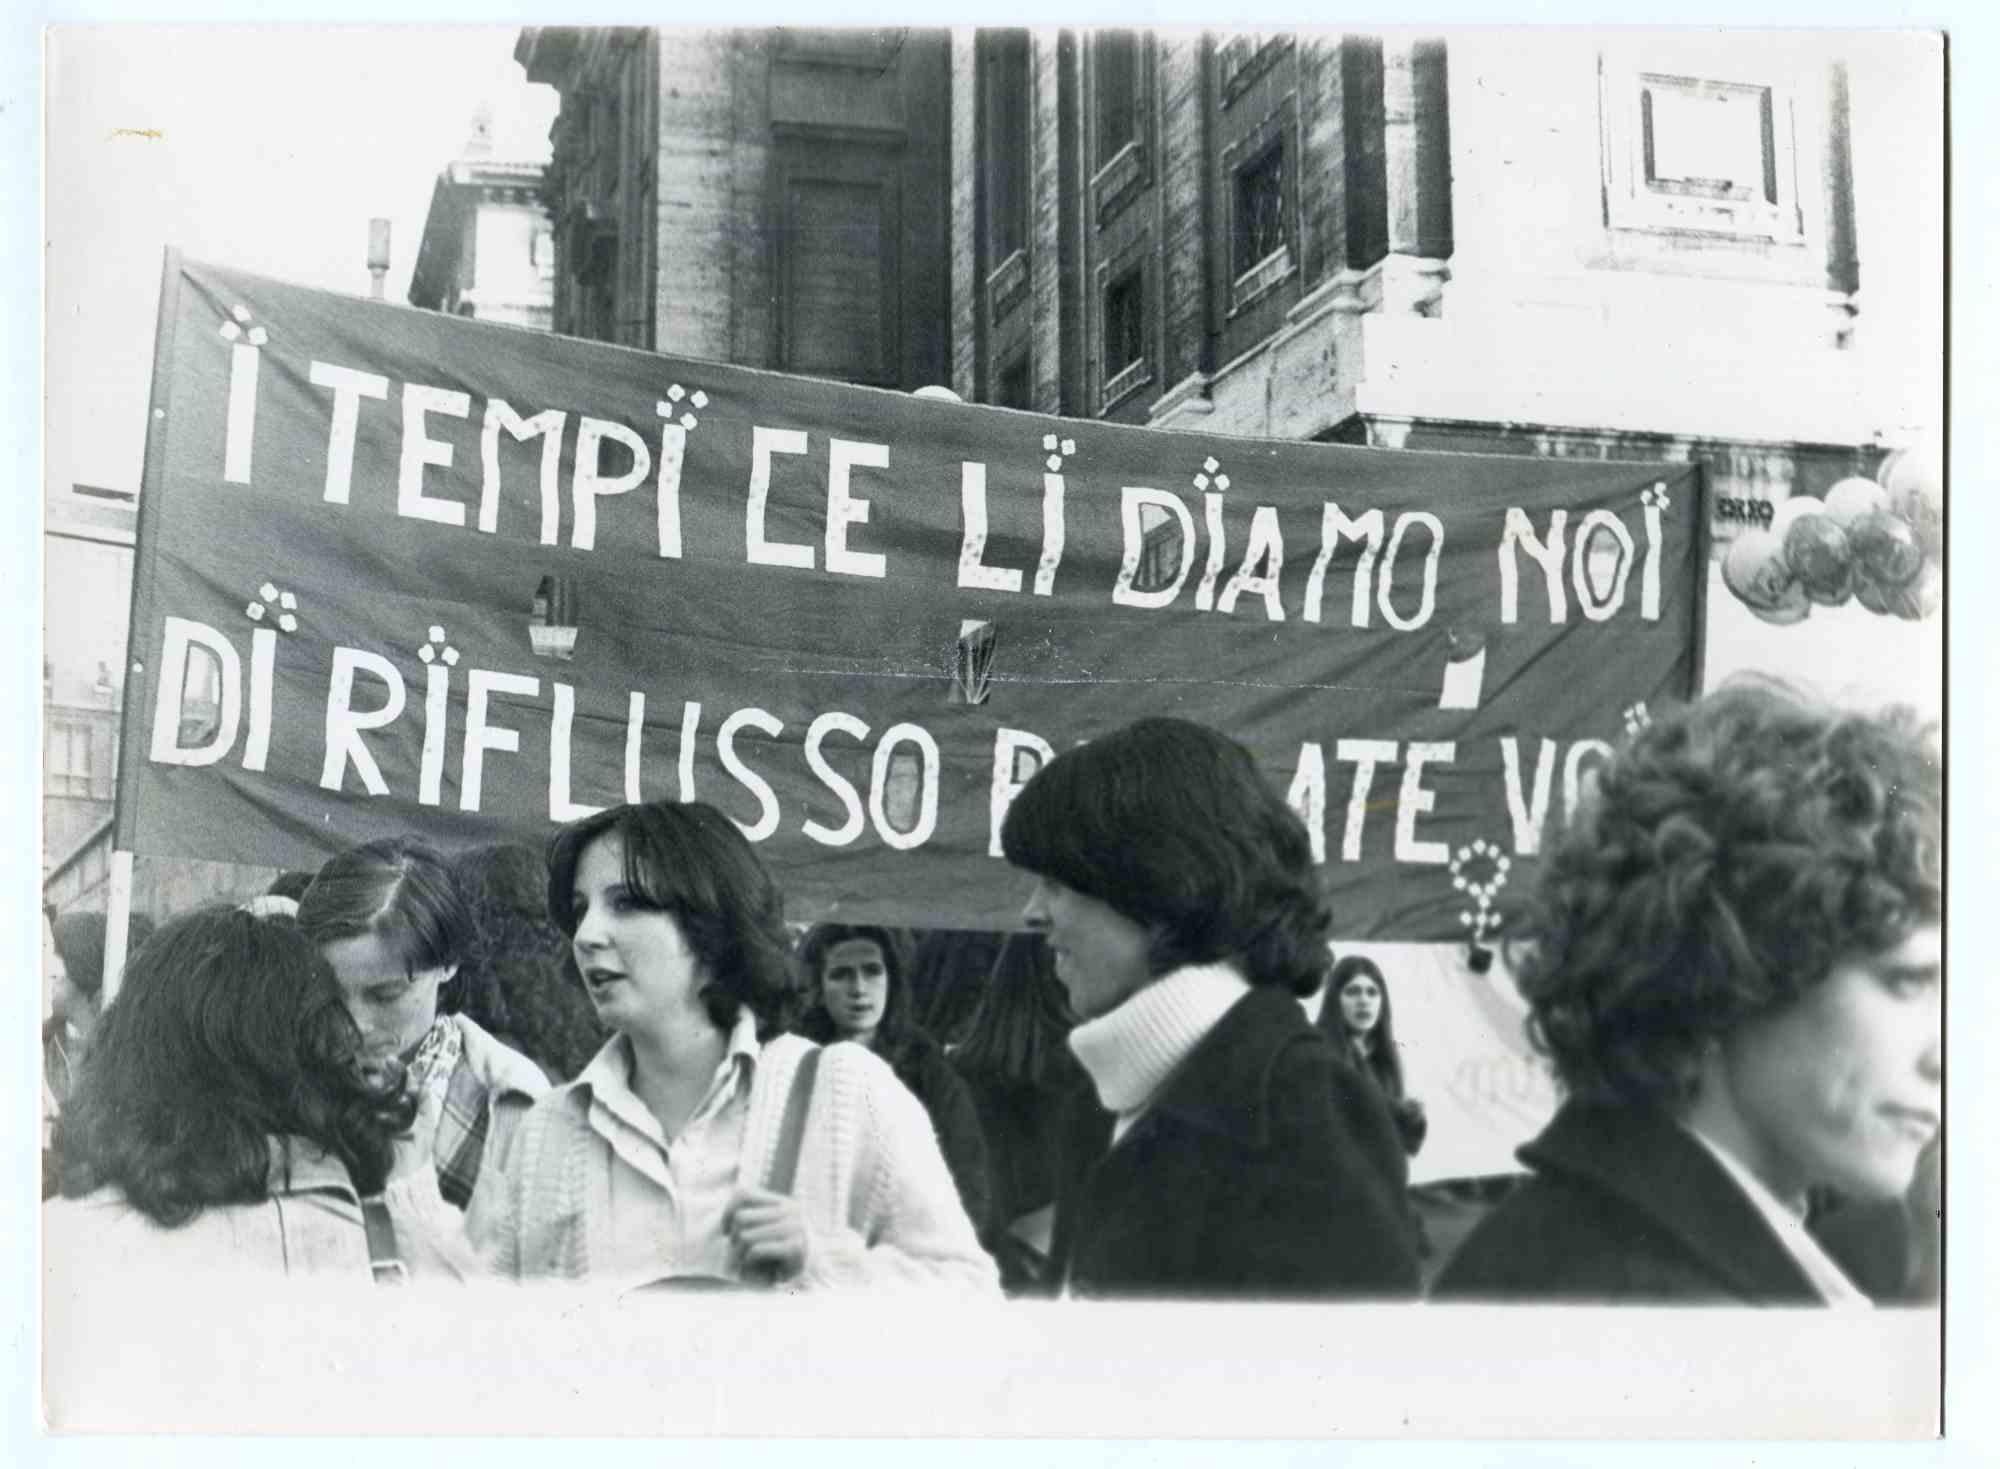 Unknown Black and White Photograph - The Protest - Historical Photograph About the Feminist Movement - 1980s